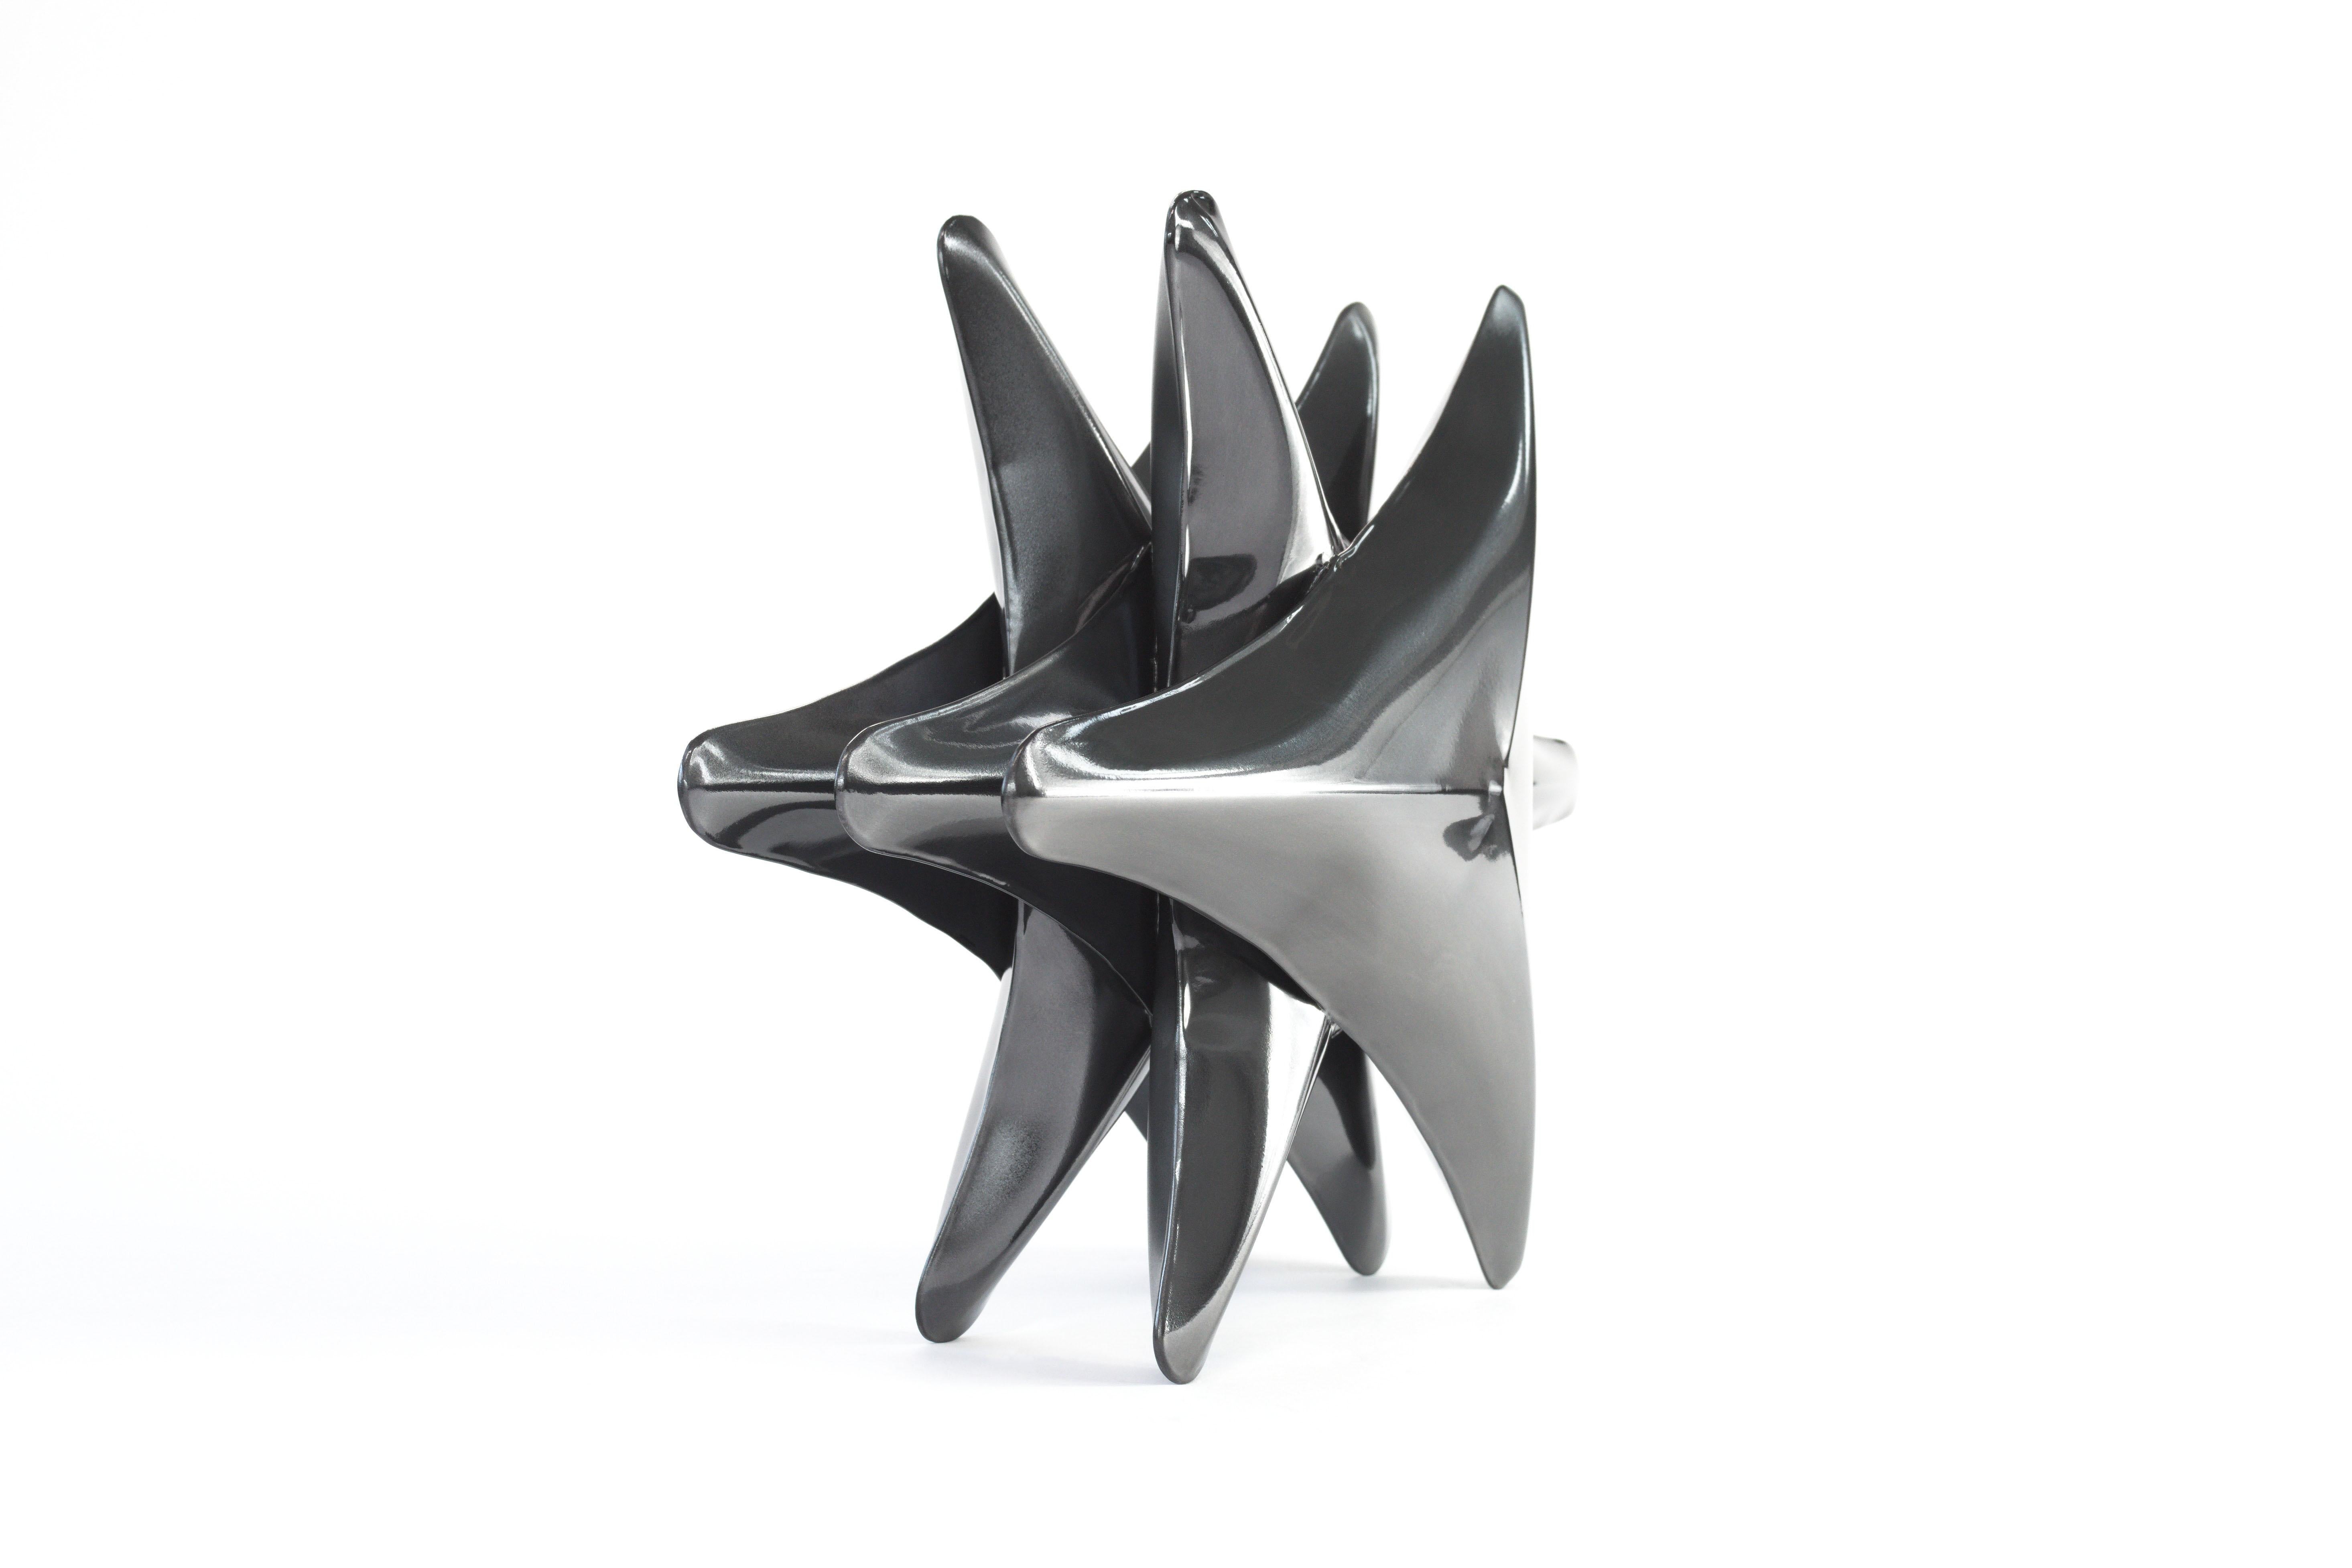 British Hydrostar Sculpture in Inflated Steel by Connor Holland For Sale